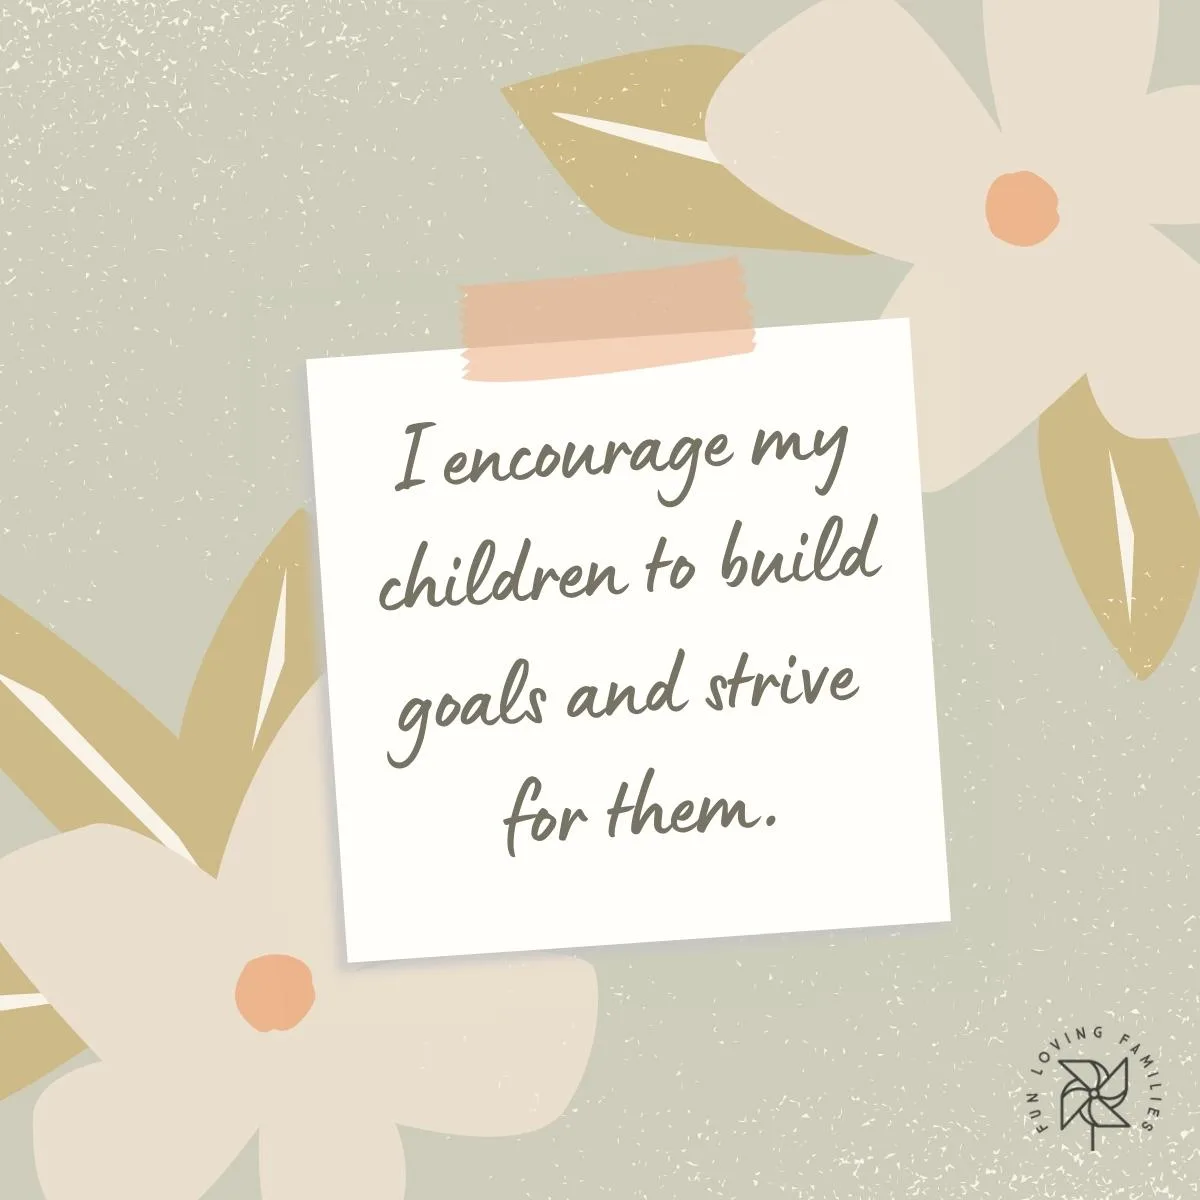 I encourage my children to build goals and strive for them affirmation